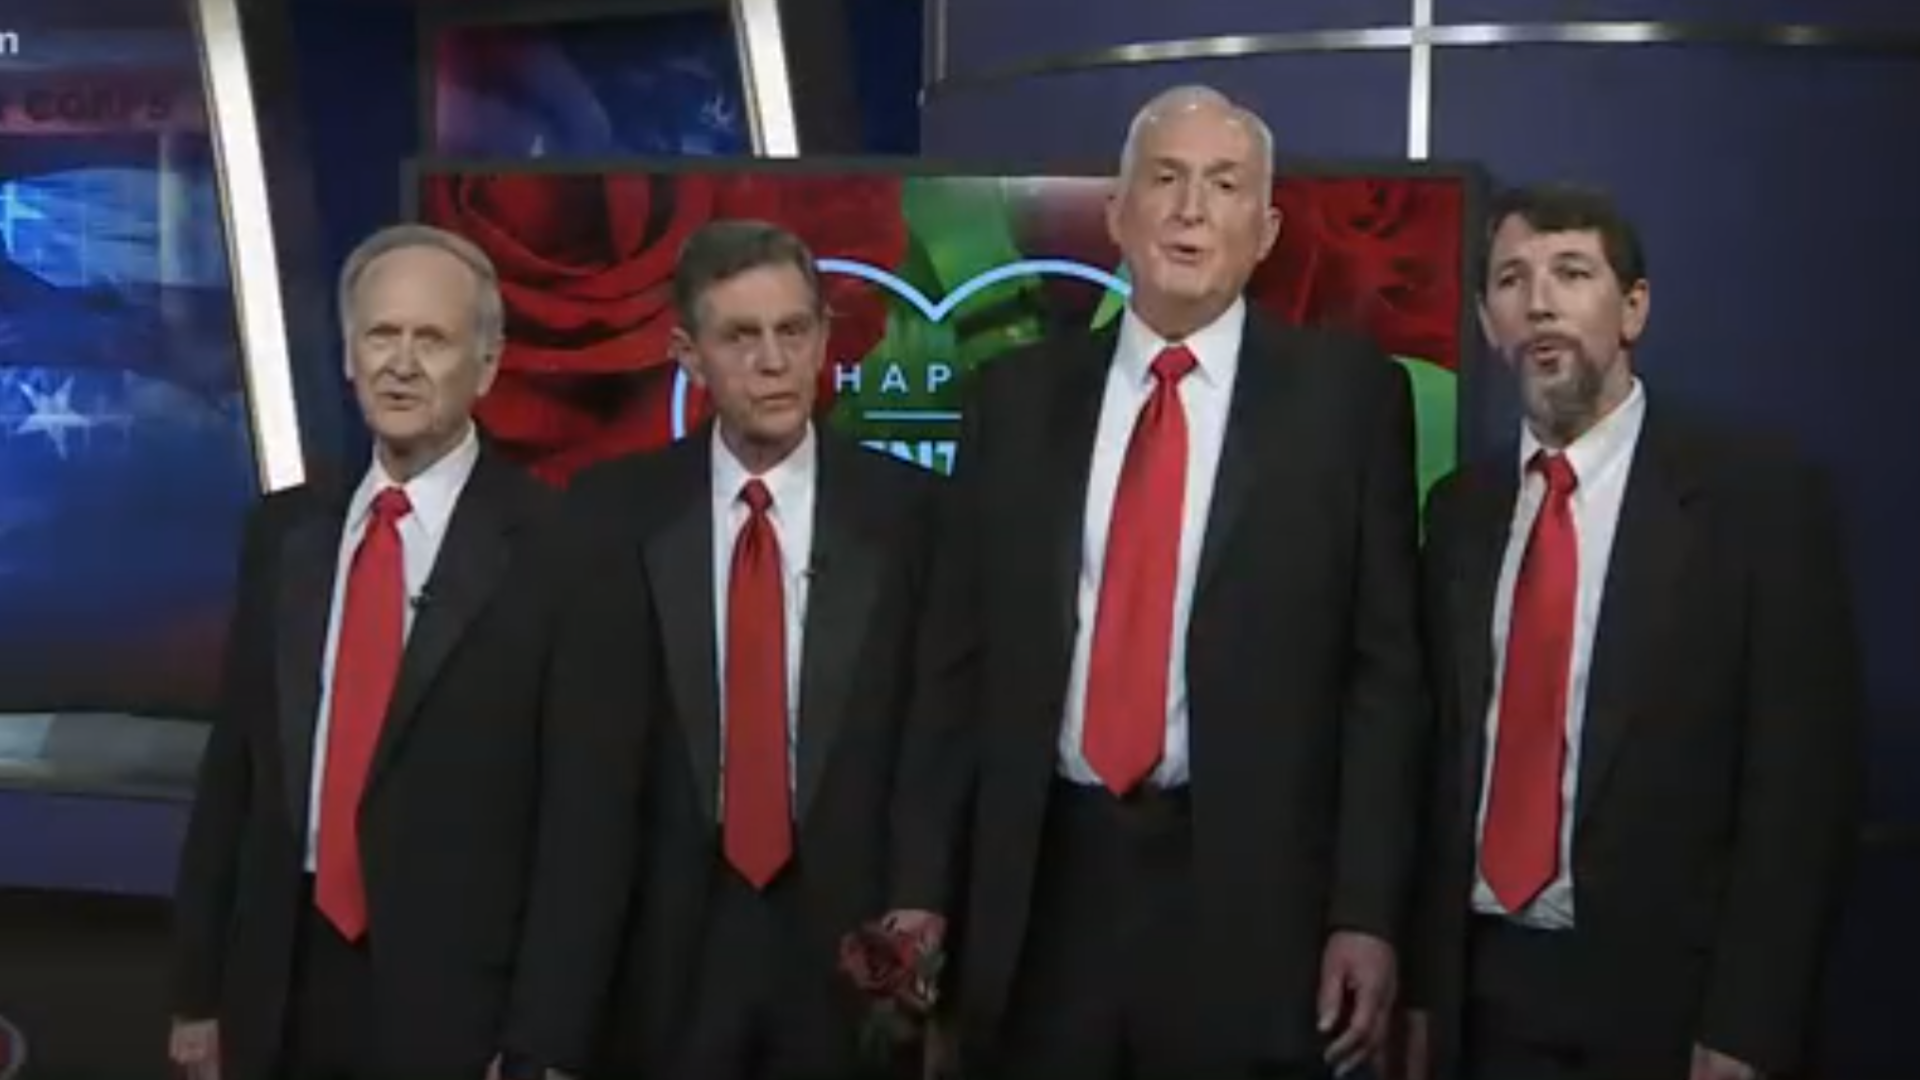 A part of the Barbershop Harmony Society, the Hmmm Quartet serenades everyone at 6 News.